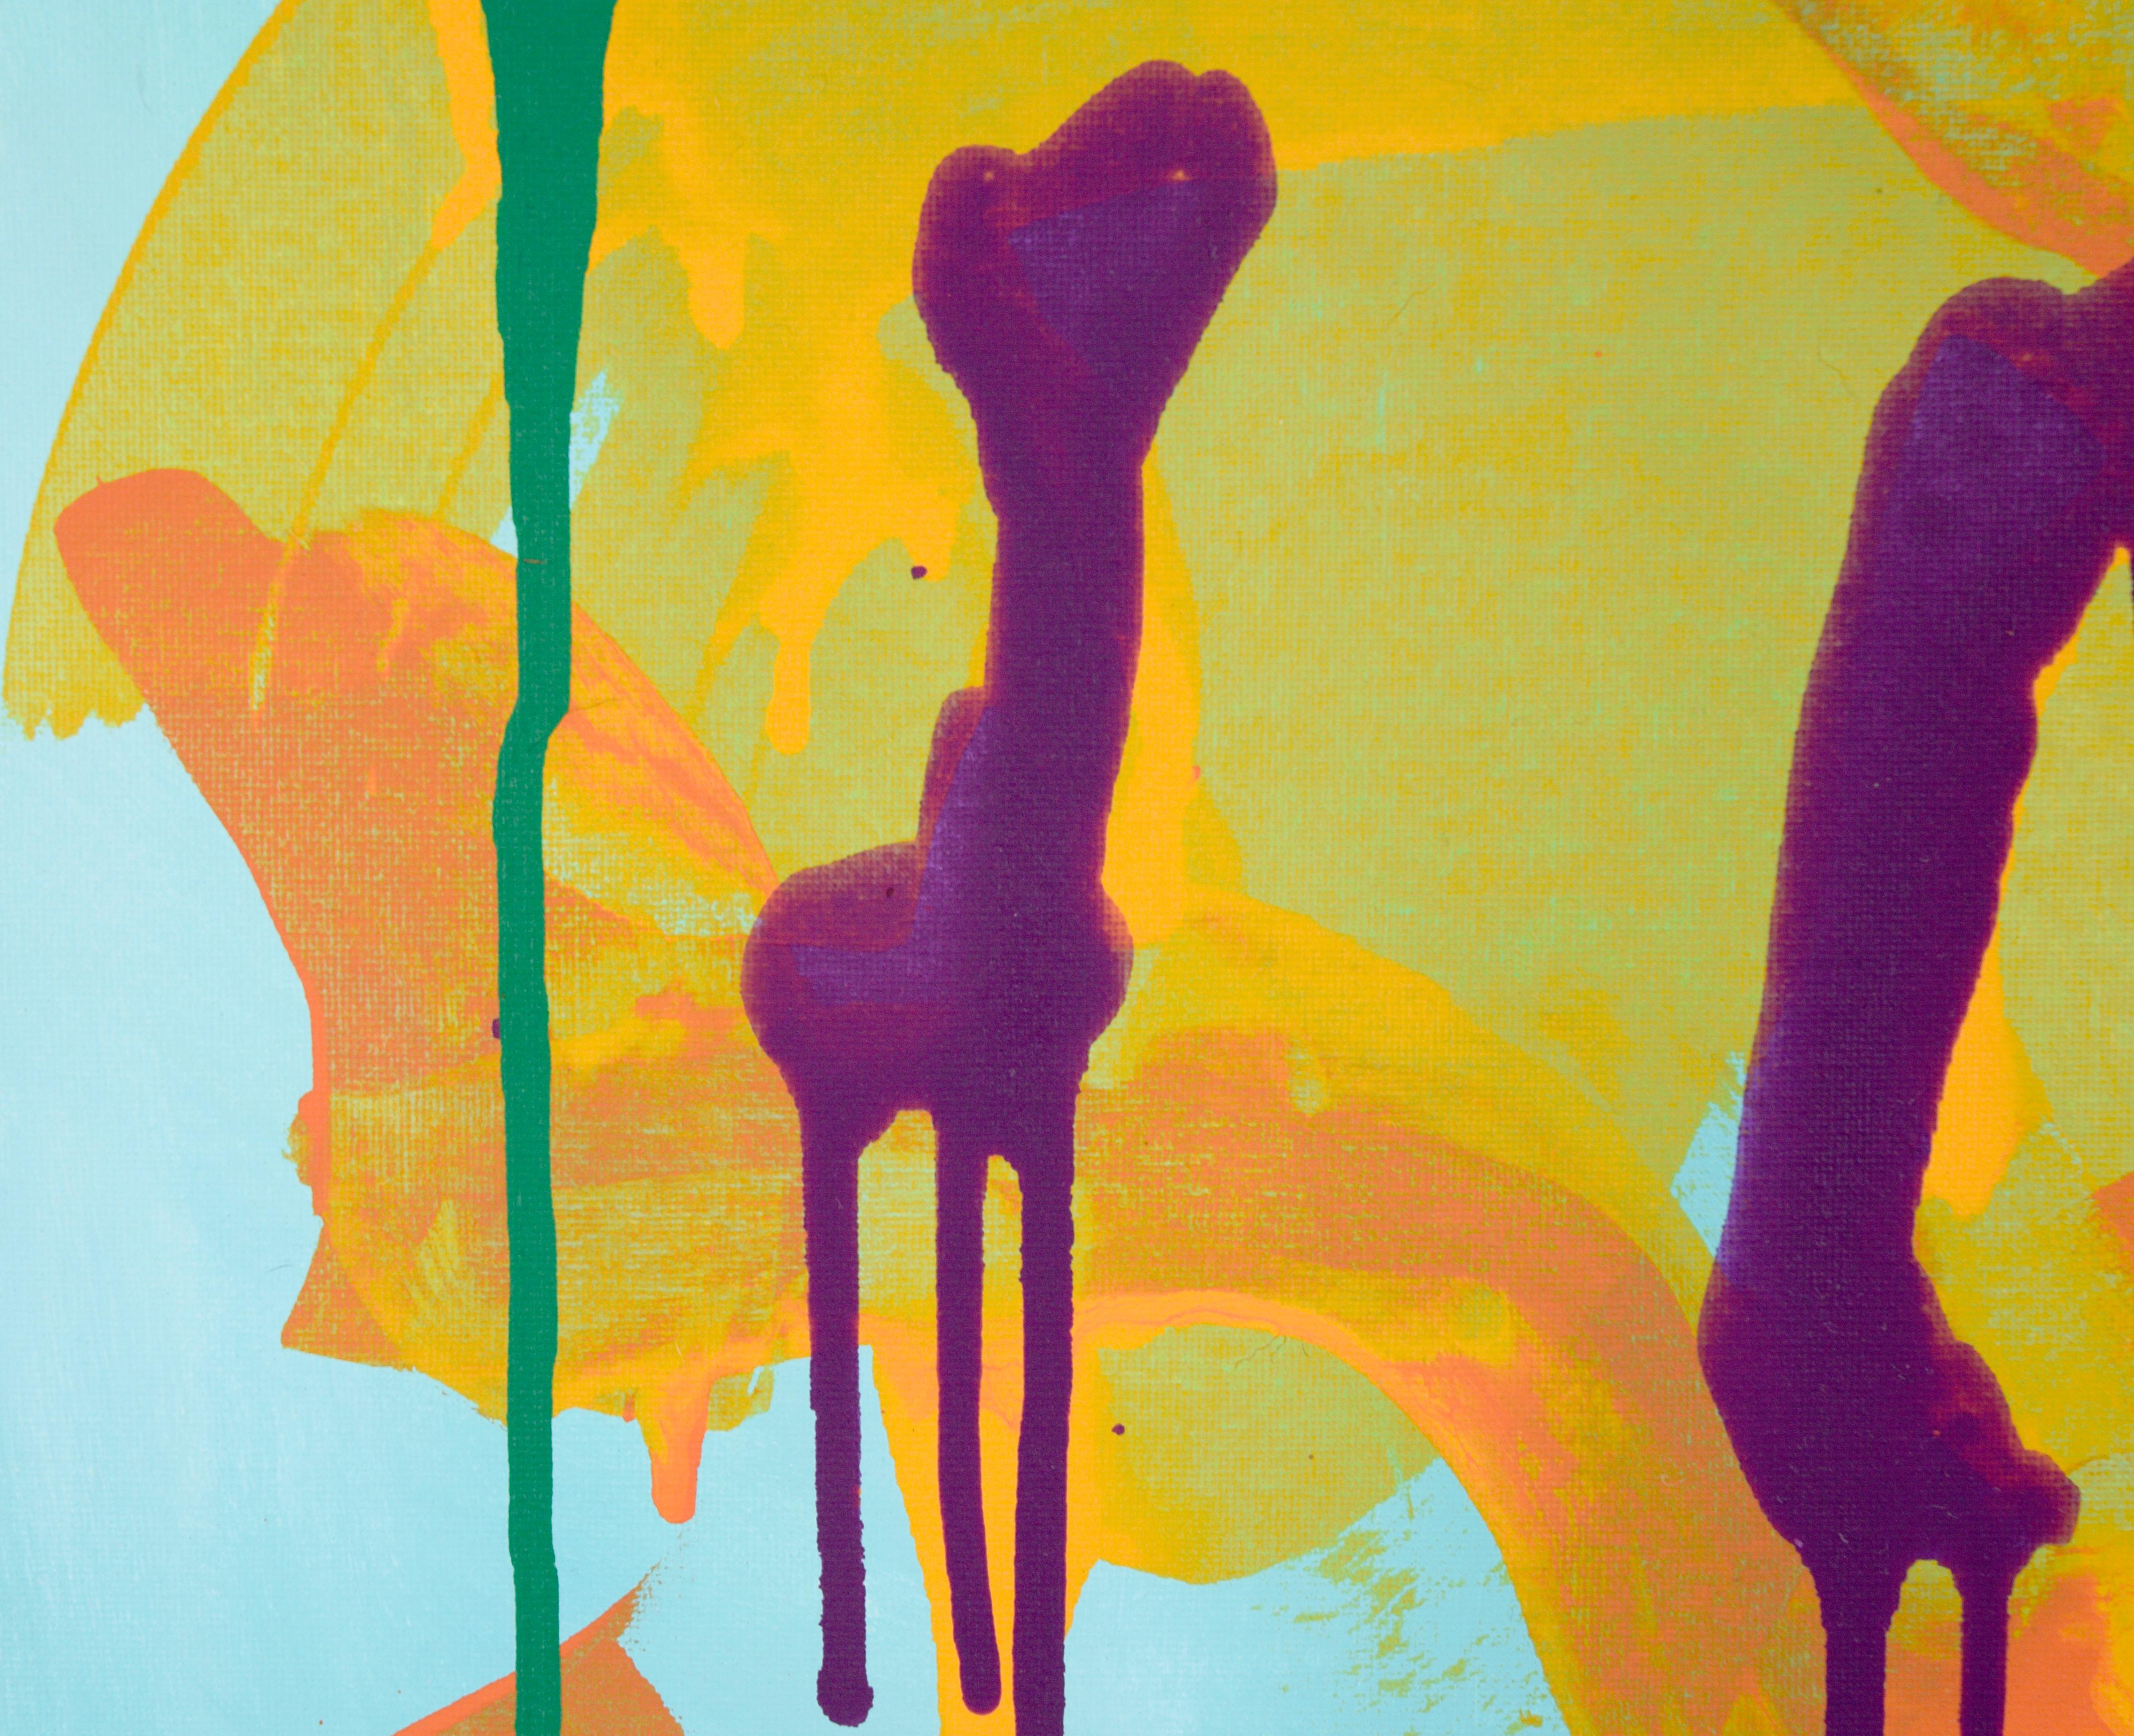 Abstract composition by California artist Devon Brockopp-Hammer (American, b. 1986). Against a light blue background, splashes of yellow, orange, purple, and green dance and drip together across the canvas.

Initialed 